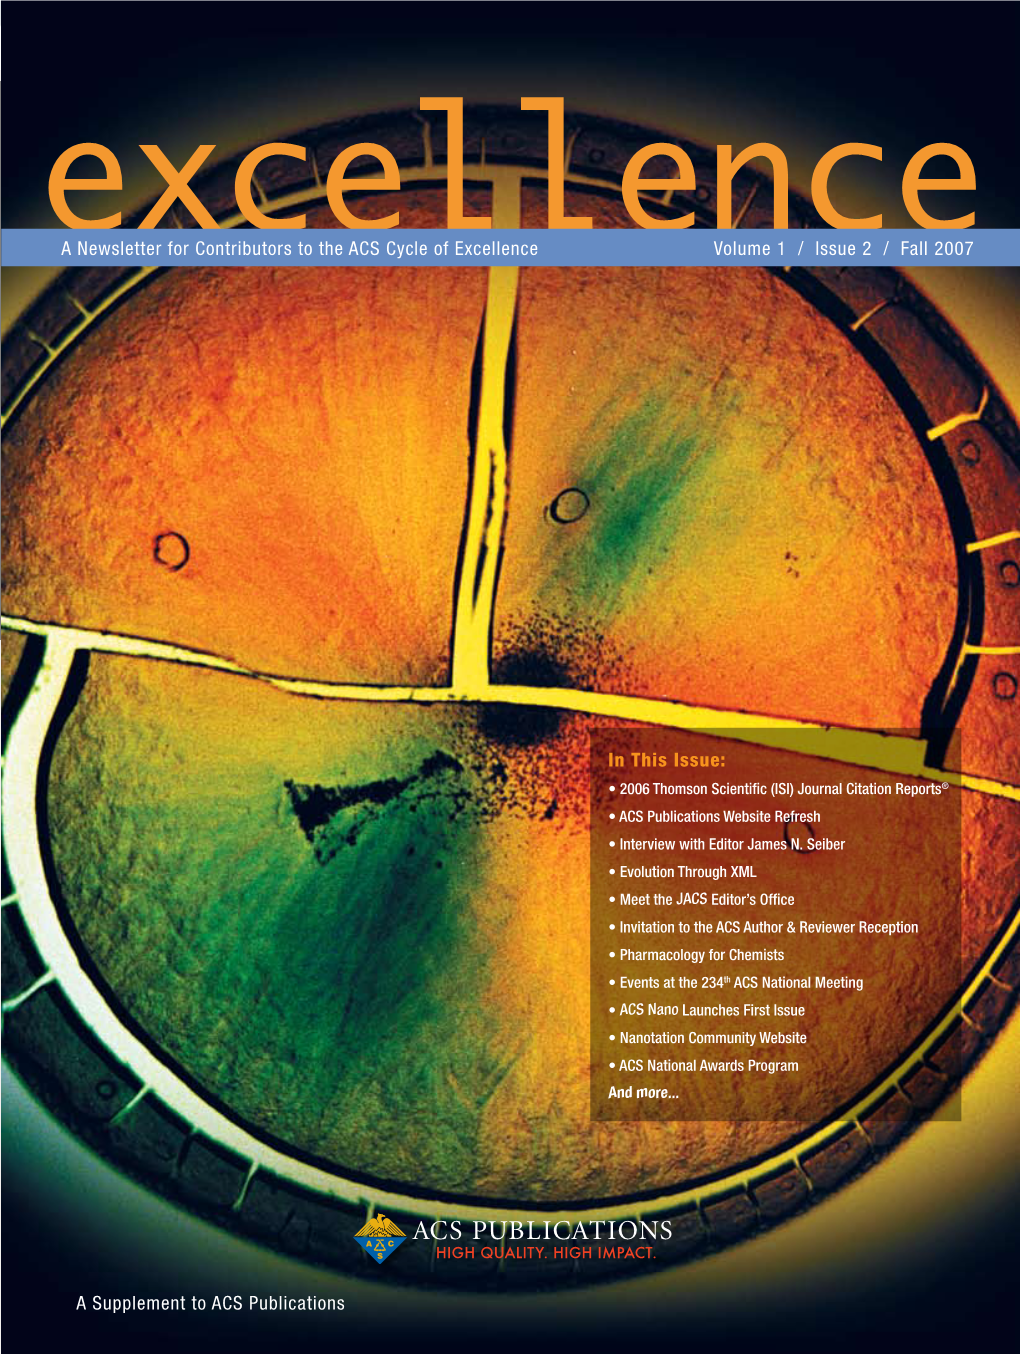 A Newsletter for Contributors to the ACS Cycle of Excellence Volume 1 / Issue 2 / Fall 2007